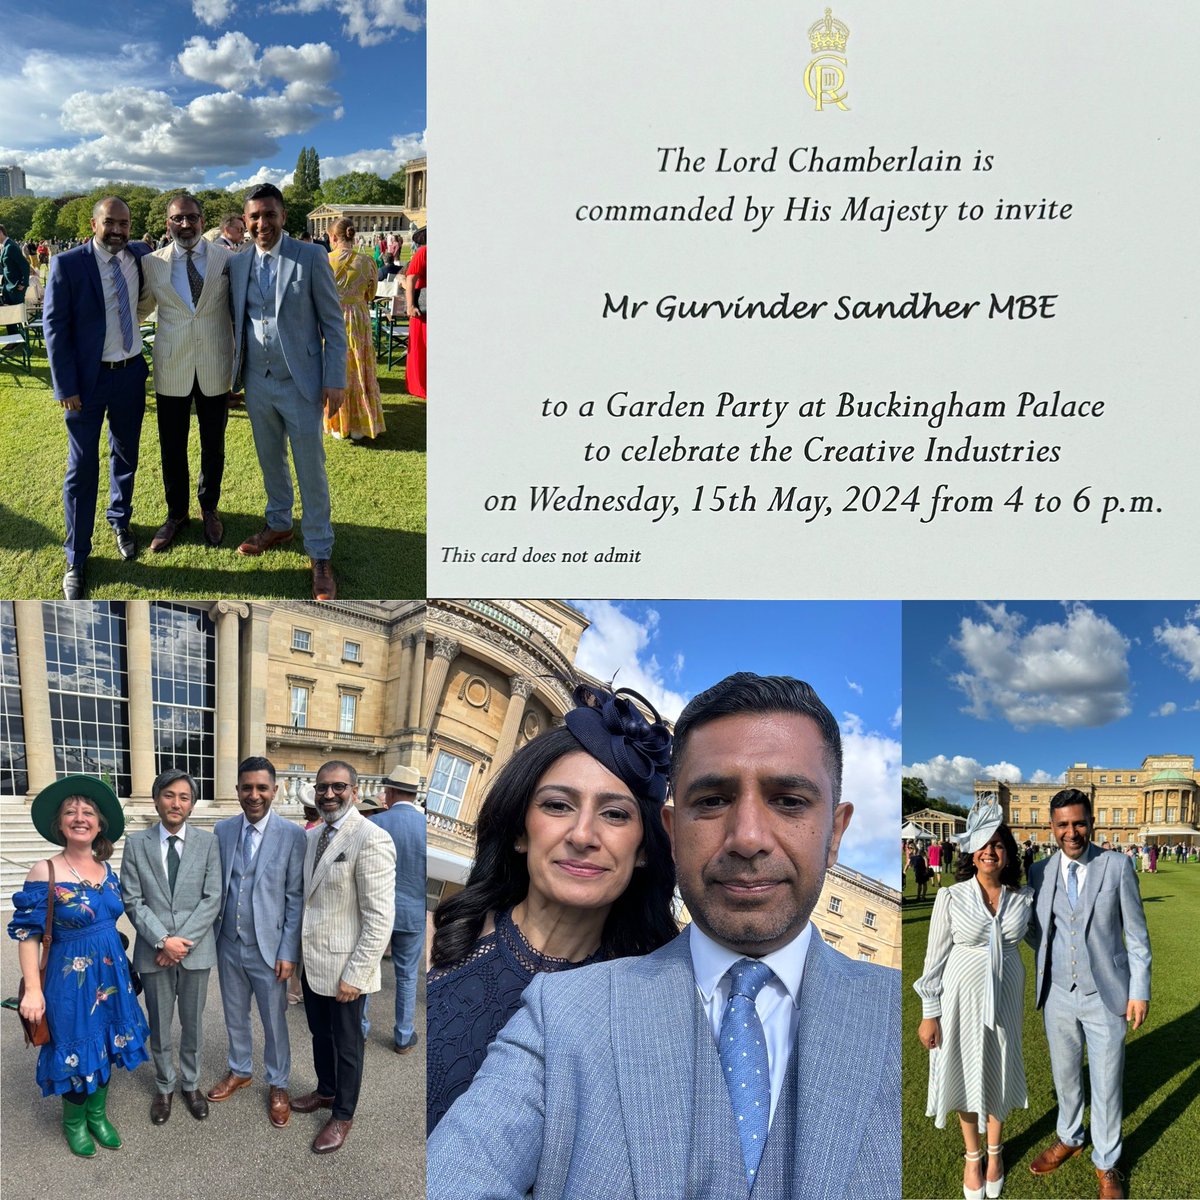 Delighted to attend Royal Garden Party at #BuckinghamPalace alongside colleagues from #arts and #culture across the UK including @OutdoorArtsUK @ArtyAbid @SangeetaITV where had the chance to catch up with old friends & speak 2 members of the #RoyalFamily about our work in #Kent